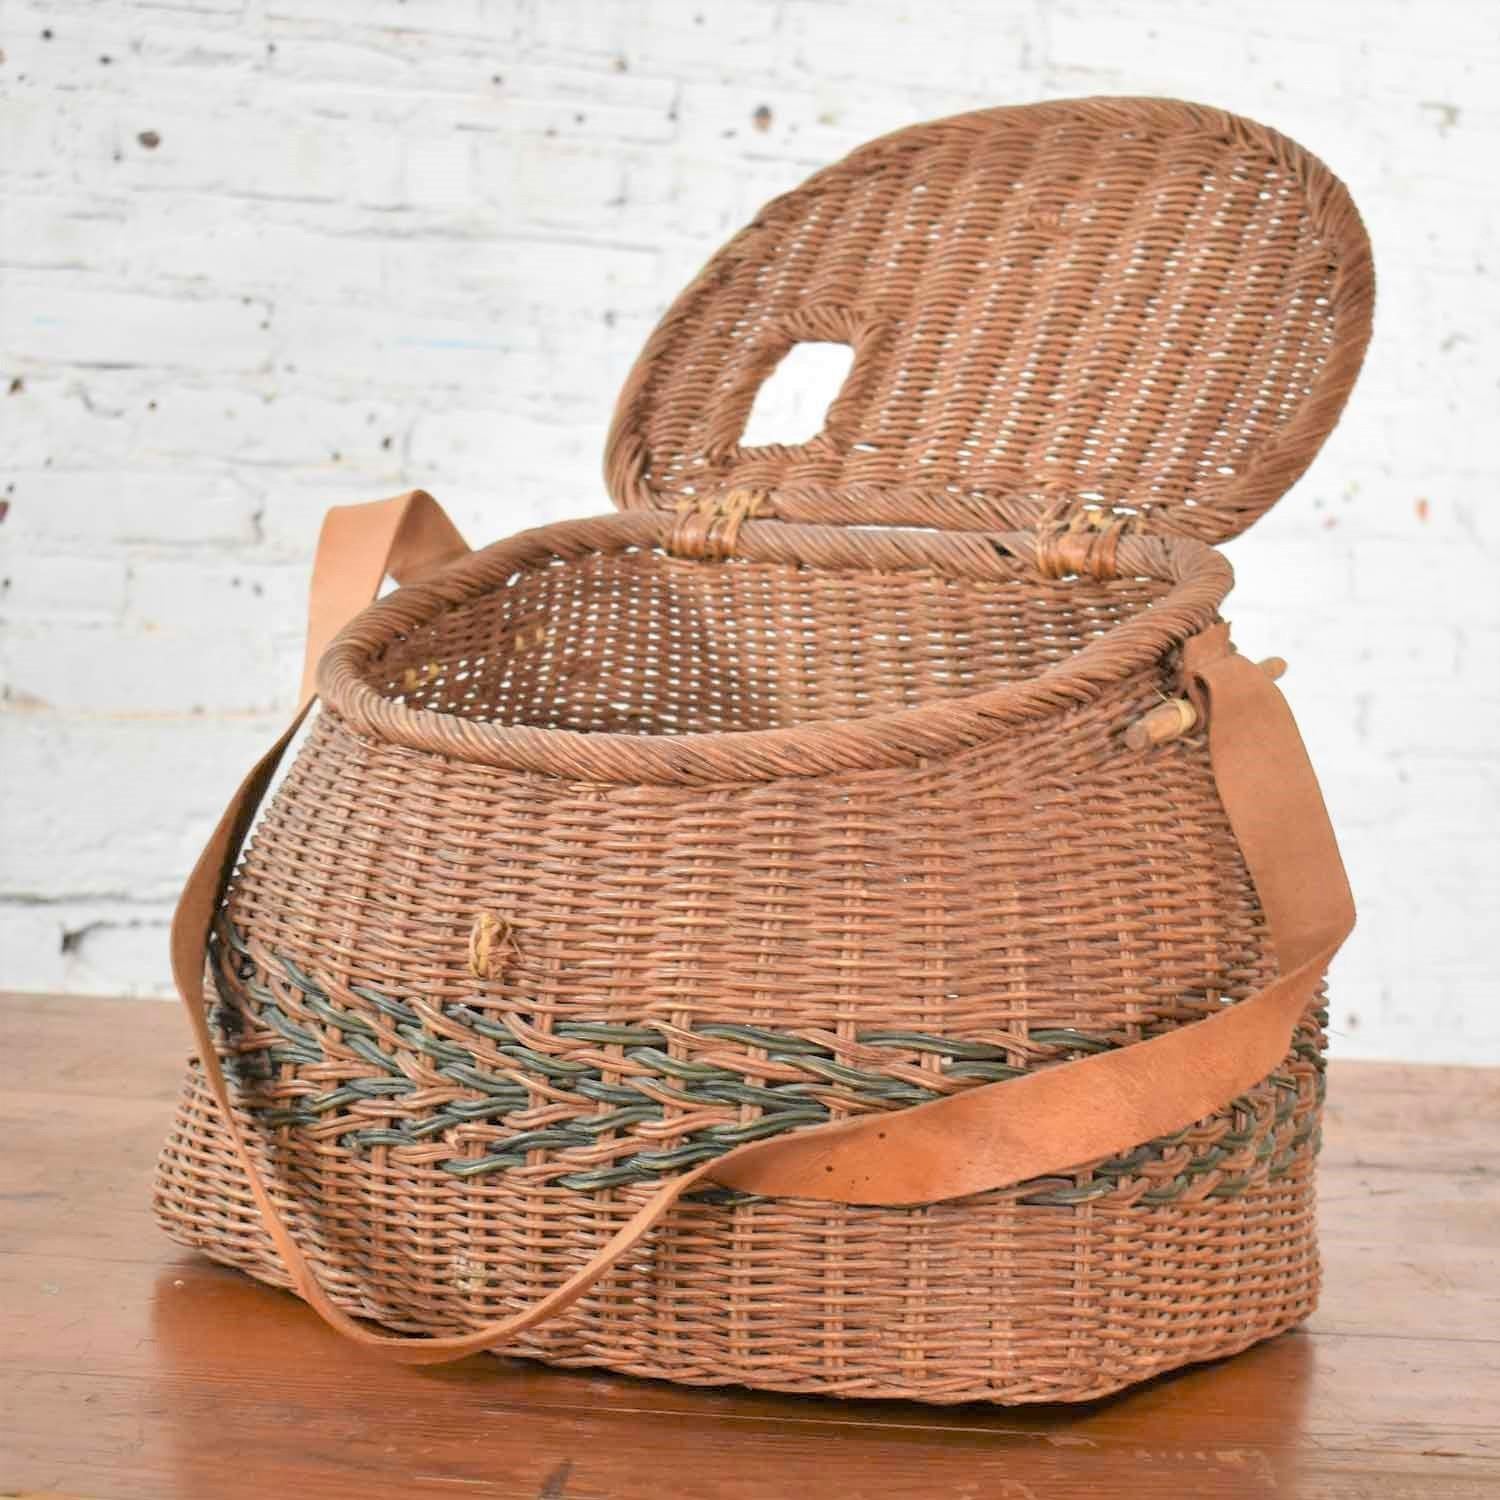 Antique Wicker Basket Fishing Creel with Leather Strap Handle 1